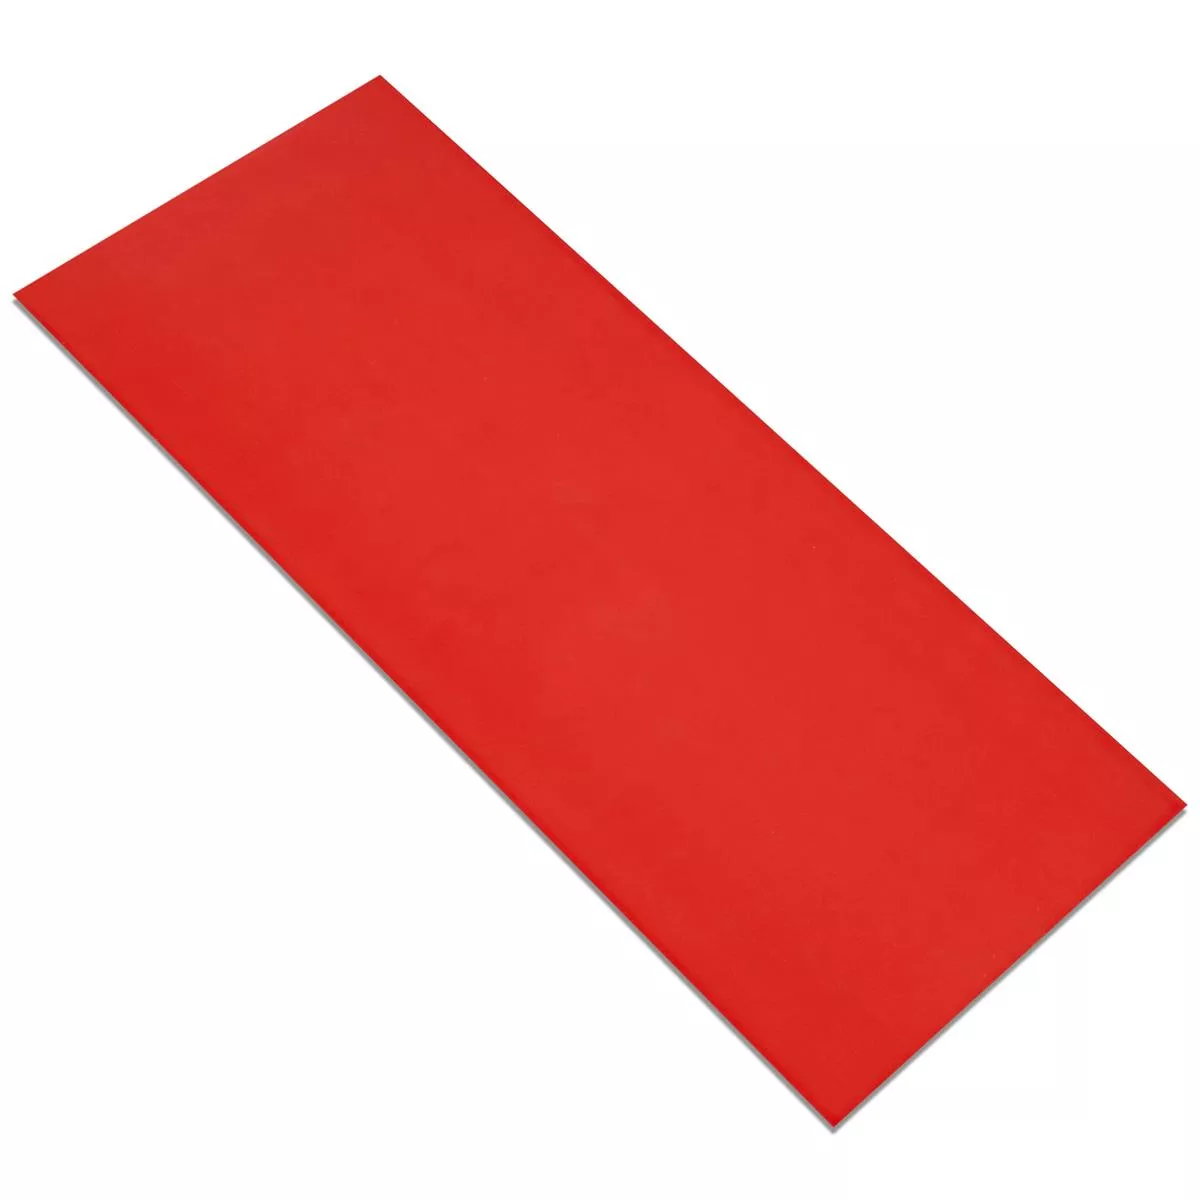 Wall Tiles Contento Red 25x50cm